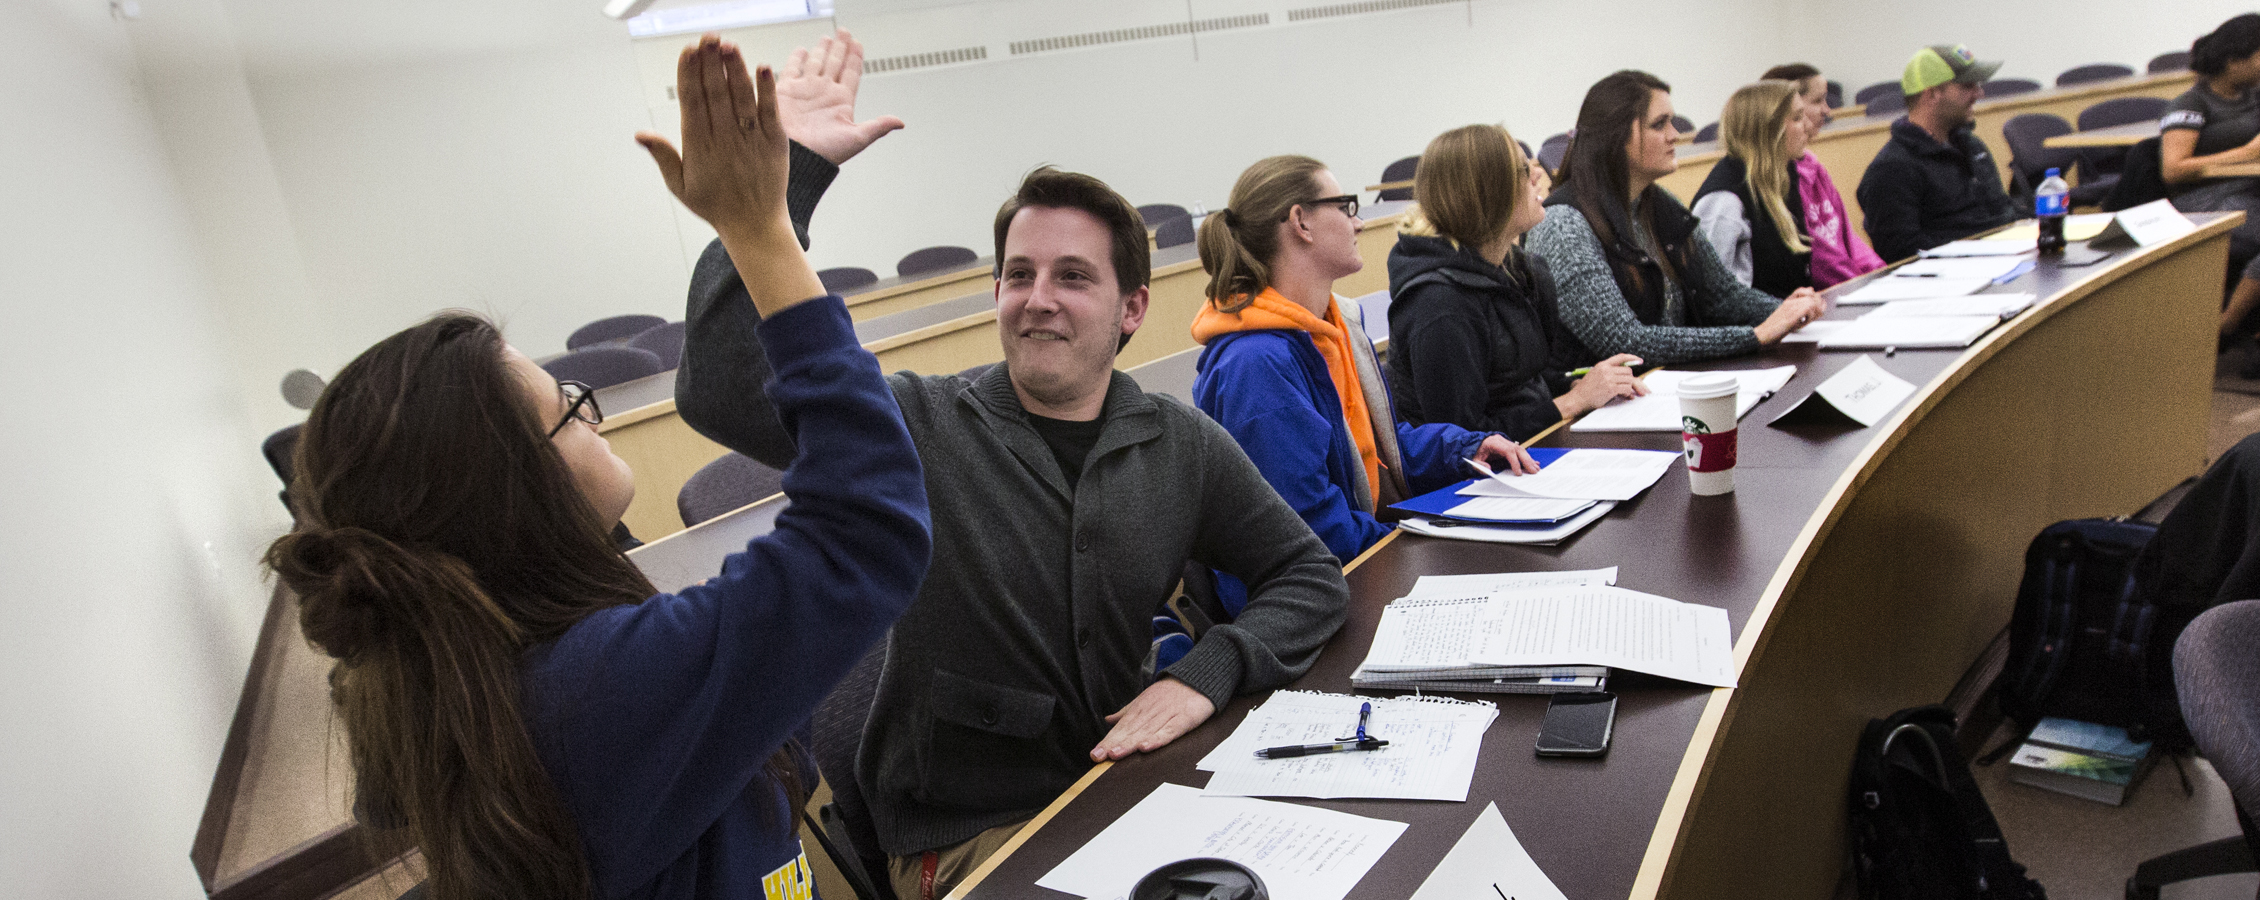 Two students high five in a classroom.